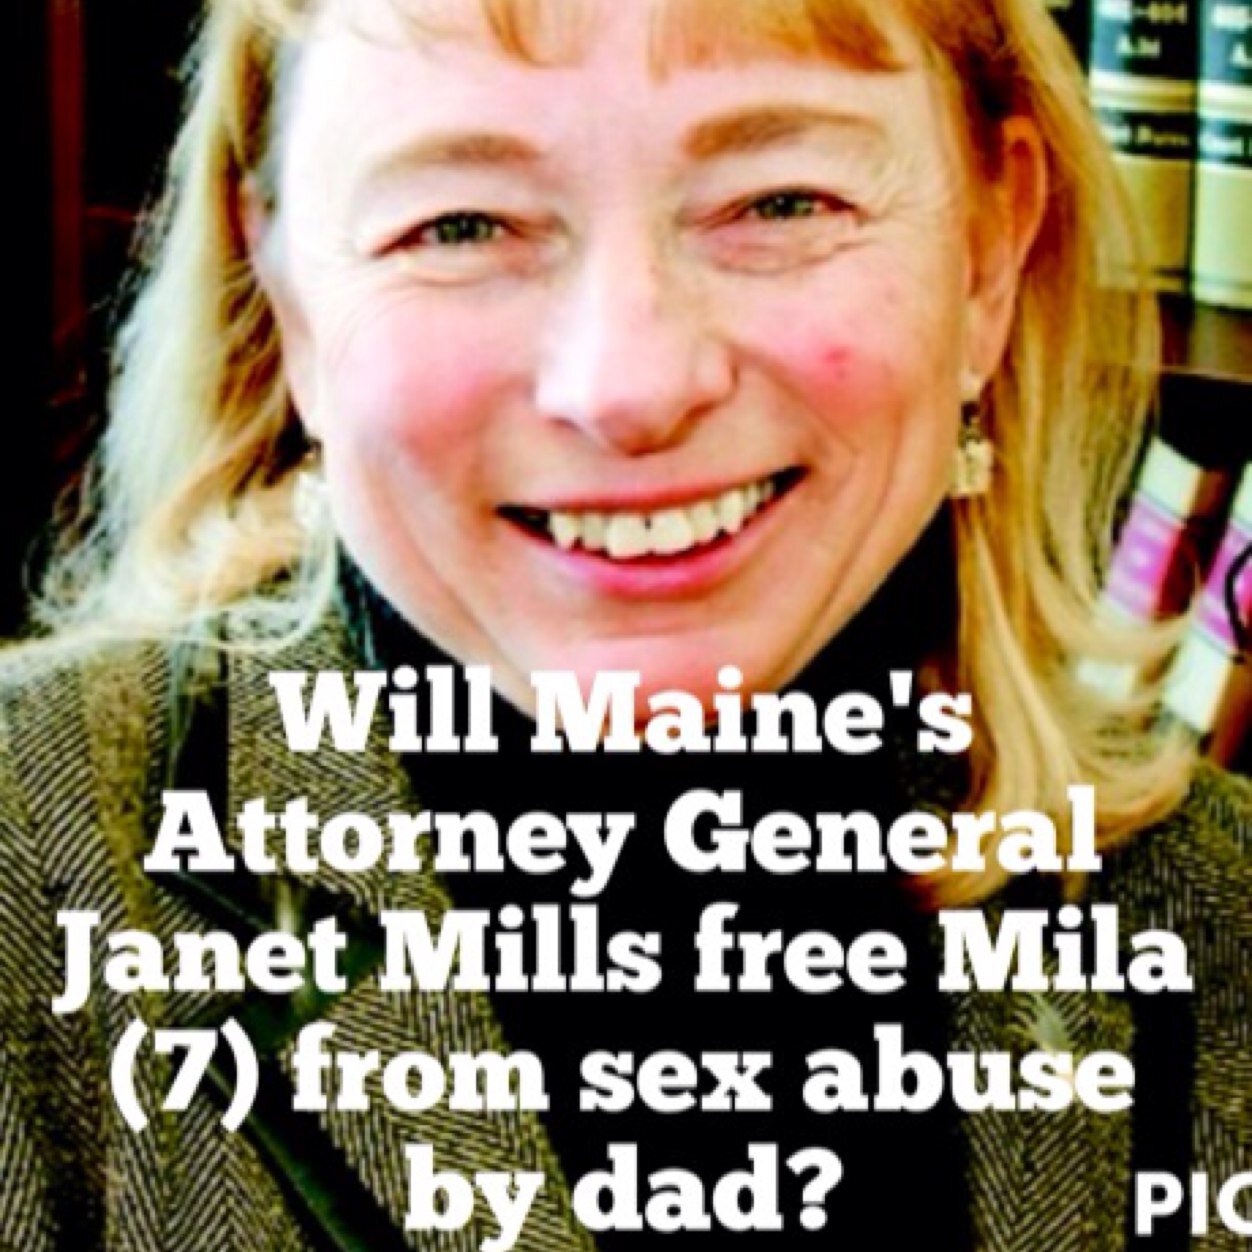 #USConstitution is violated in #Maine where Mila (10) lives 24/7 with sexually abusive dad on drugs, when he should be deported #OpDeathEaters